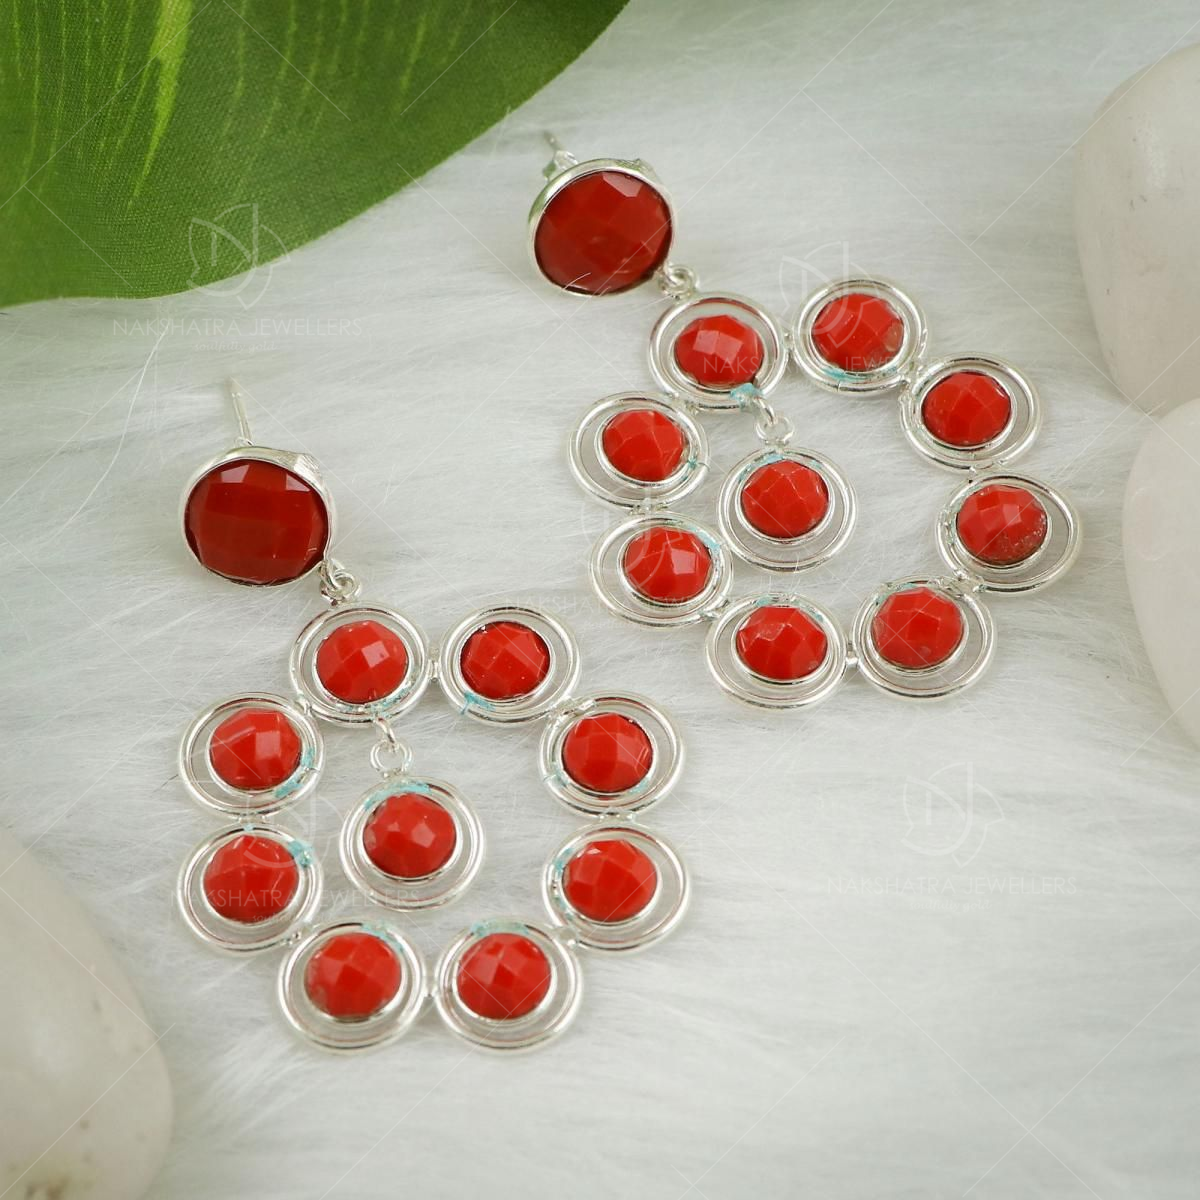 Single Red Coral Stone Gold Studs Shop Now Online ER3790